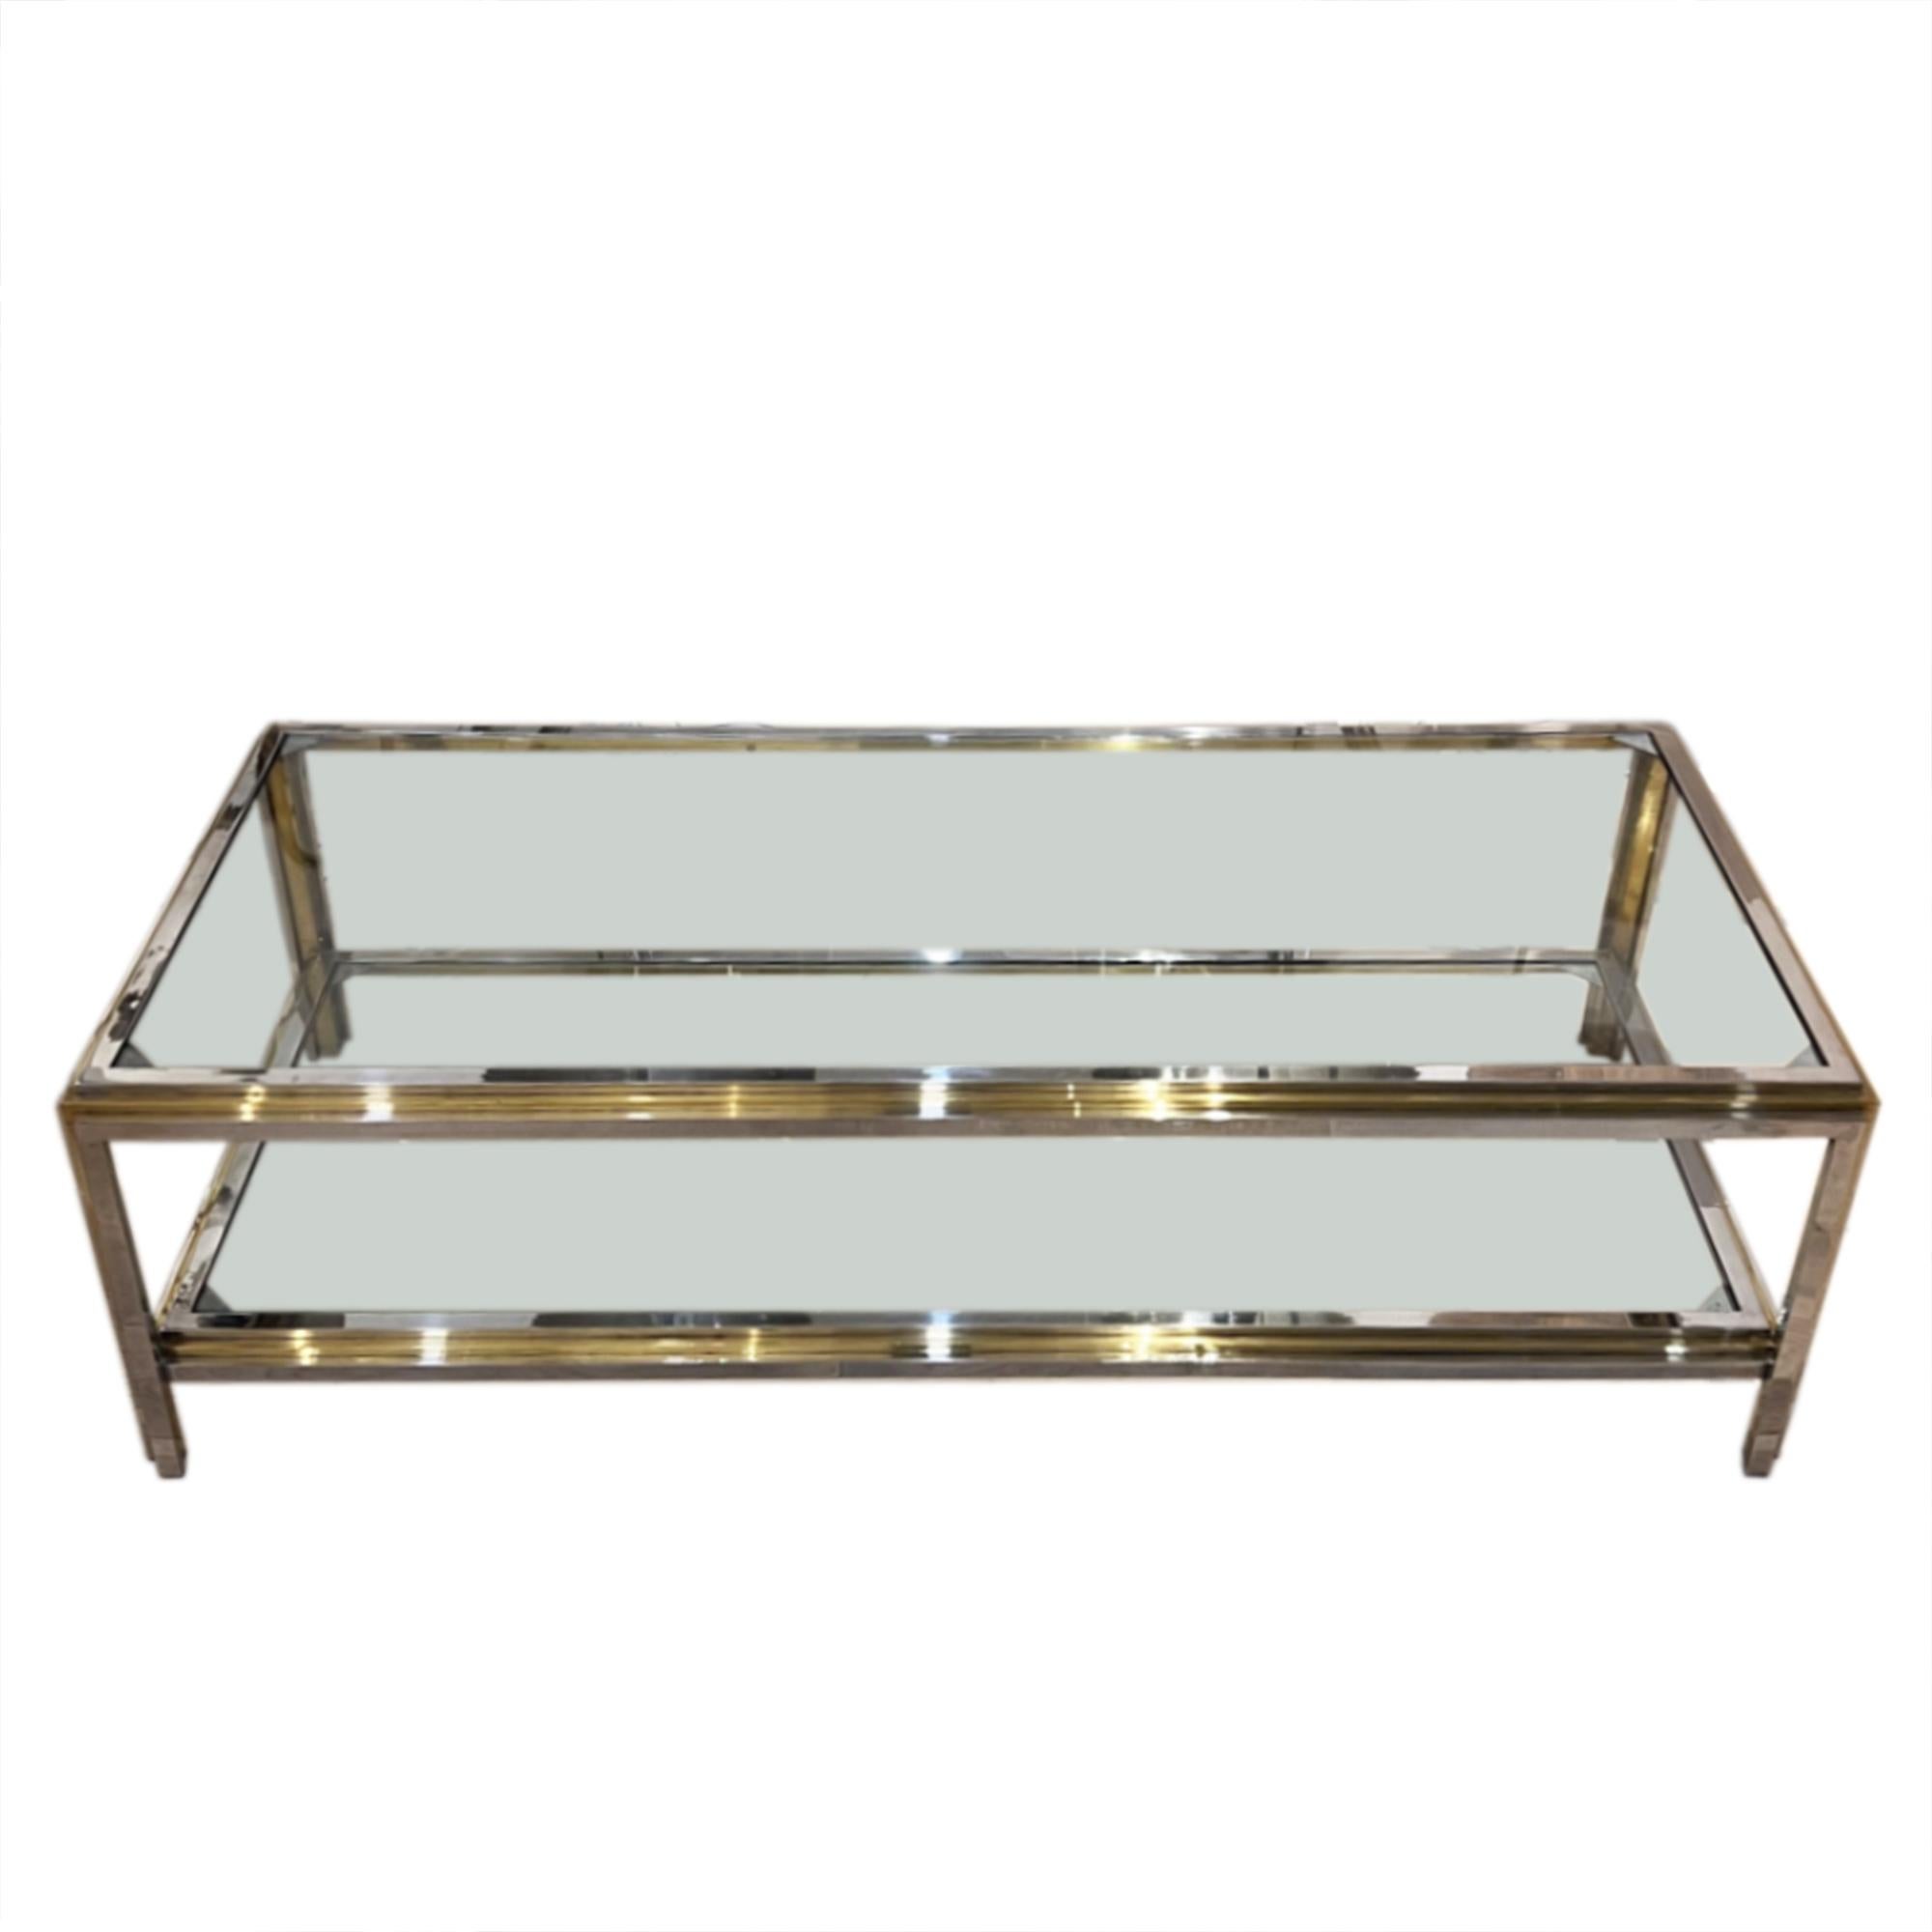 This is a great pair of midcentury coffee tables. We can sell them together, or separately. 

The stylish brass and chrome frames have a simple, elegant design - please take a look at all our pictures. 

Crafted in the style of Willy Rizzo, these